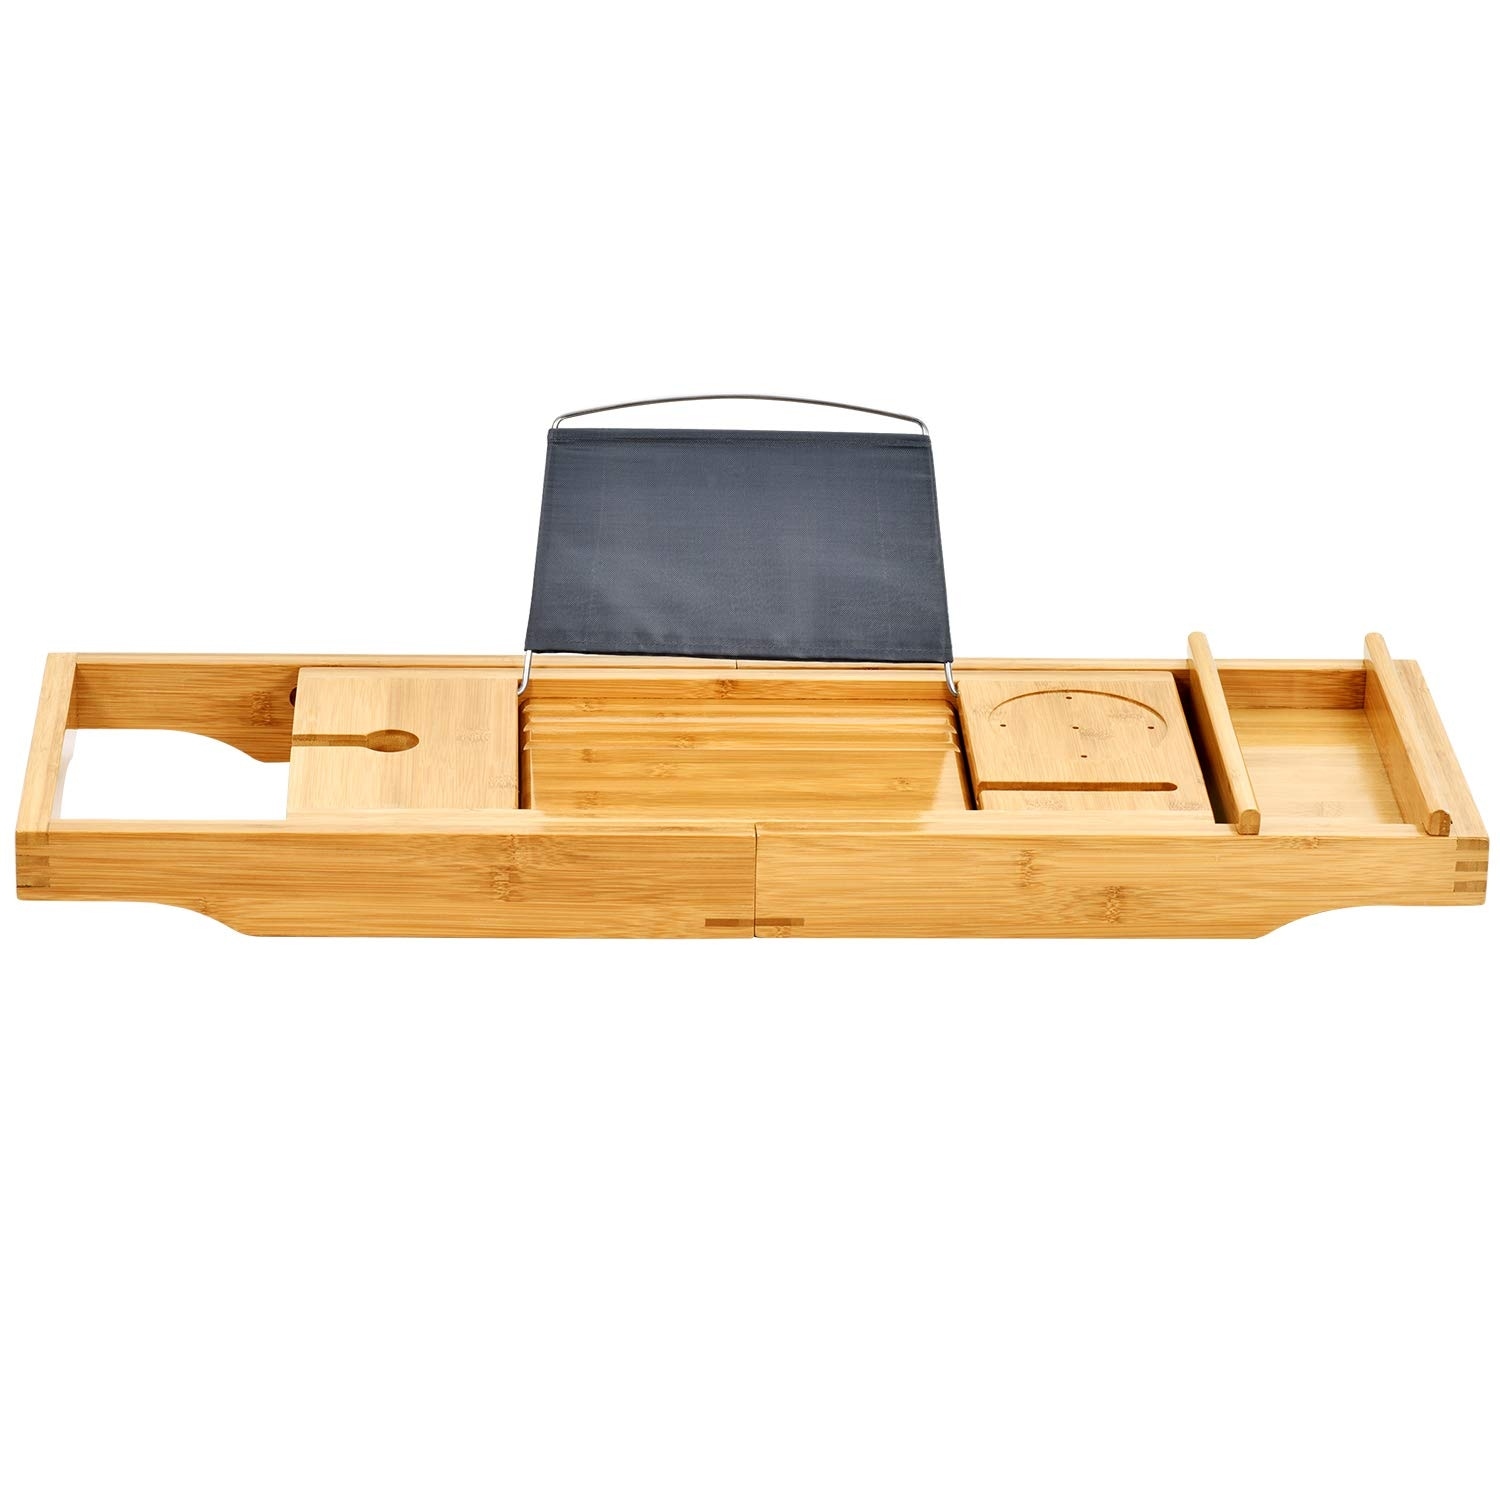 https://ak1.ostkcdn.com/images/products/is/images/direct/0c5346cee1c53aa12bda33f9093045d016590d9f/ToiletTree-Products-Deluxe-Bamboo-Bathtub-Caddy.jpg